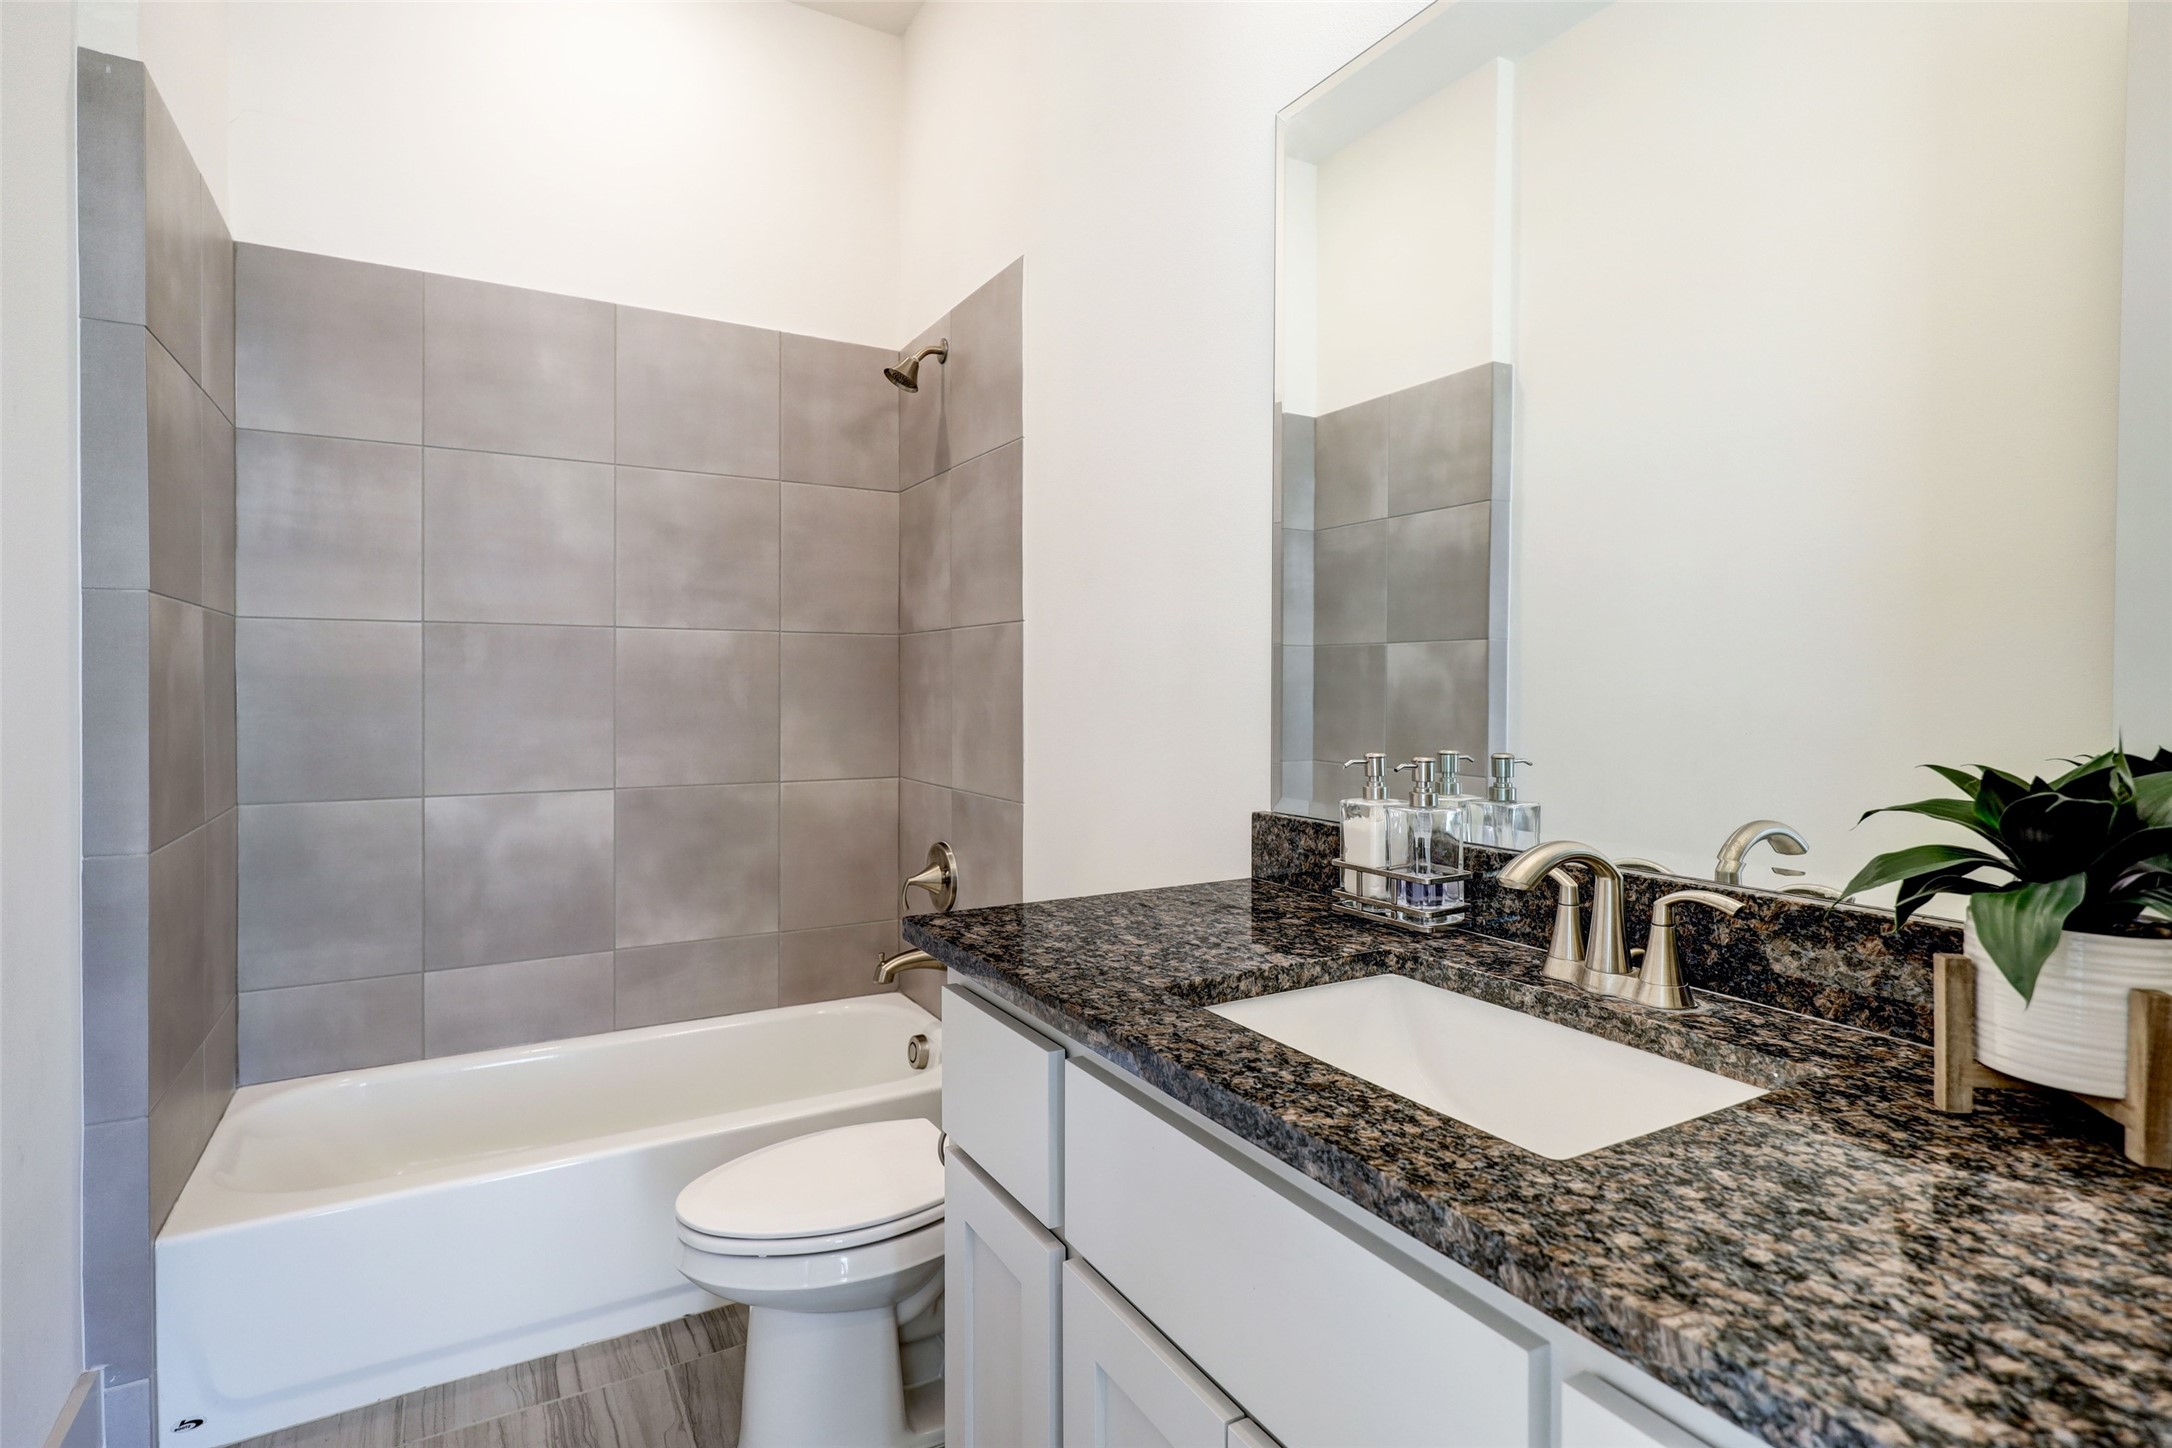 The first-floor full bath, strategically positioned near the movie room, offers flexibility and convenience for various uses. This well-appointed bathroom includes a bath/shower combination, an undermount sink, and nickel fixtures, providing both style and functionality for residents and guests alike. Its accessible location adds practicality to the overall design of the home.